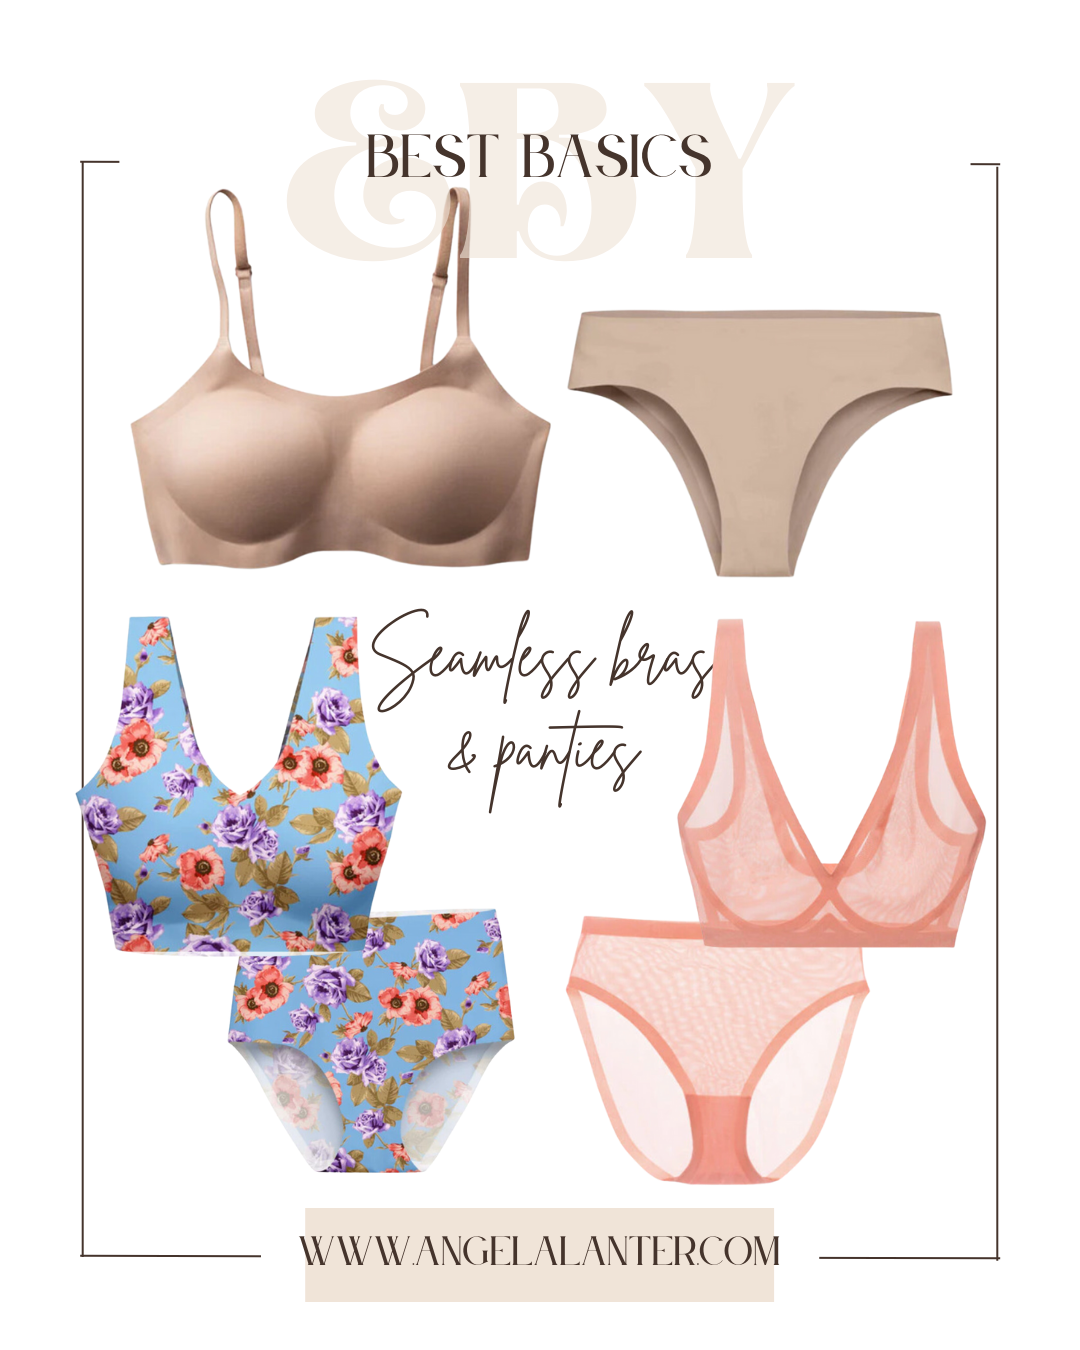 Ebys seamless bras and panties comfortable for every woman by fashion blogger Angela Lanter